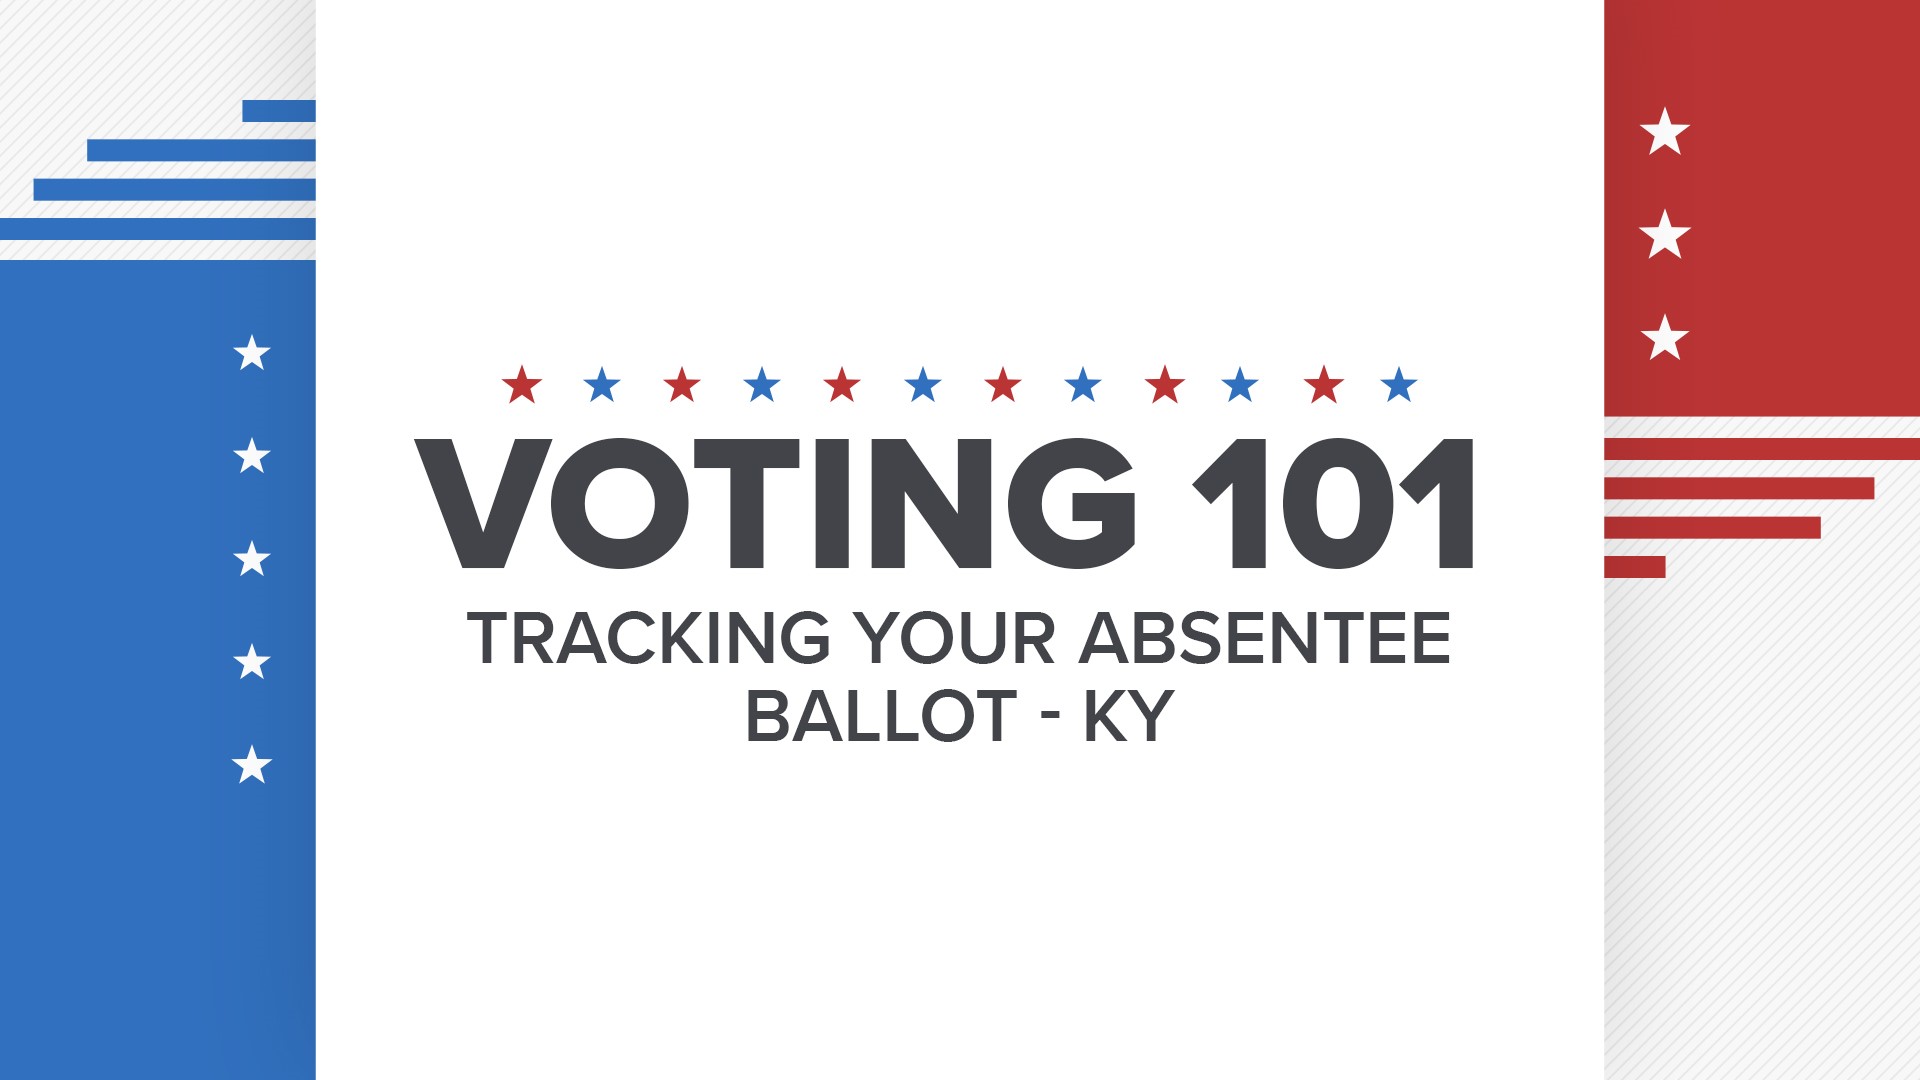 If you want to make sure your absentee ballot gets to its destination, here's how you can track it in Kentucky.